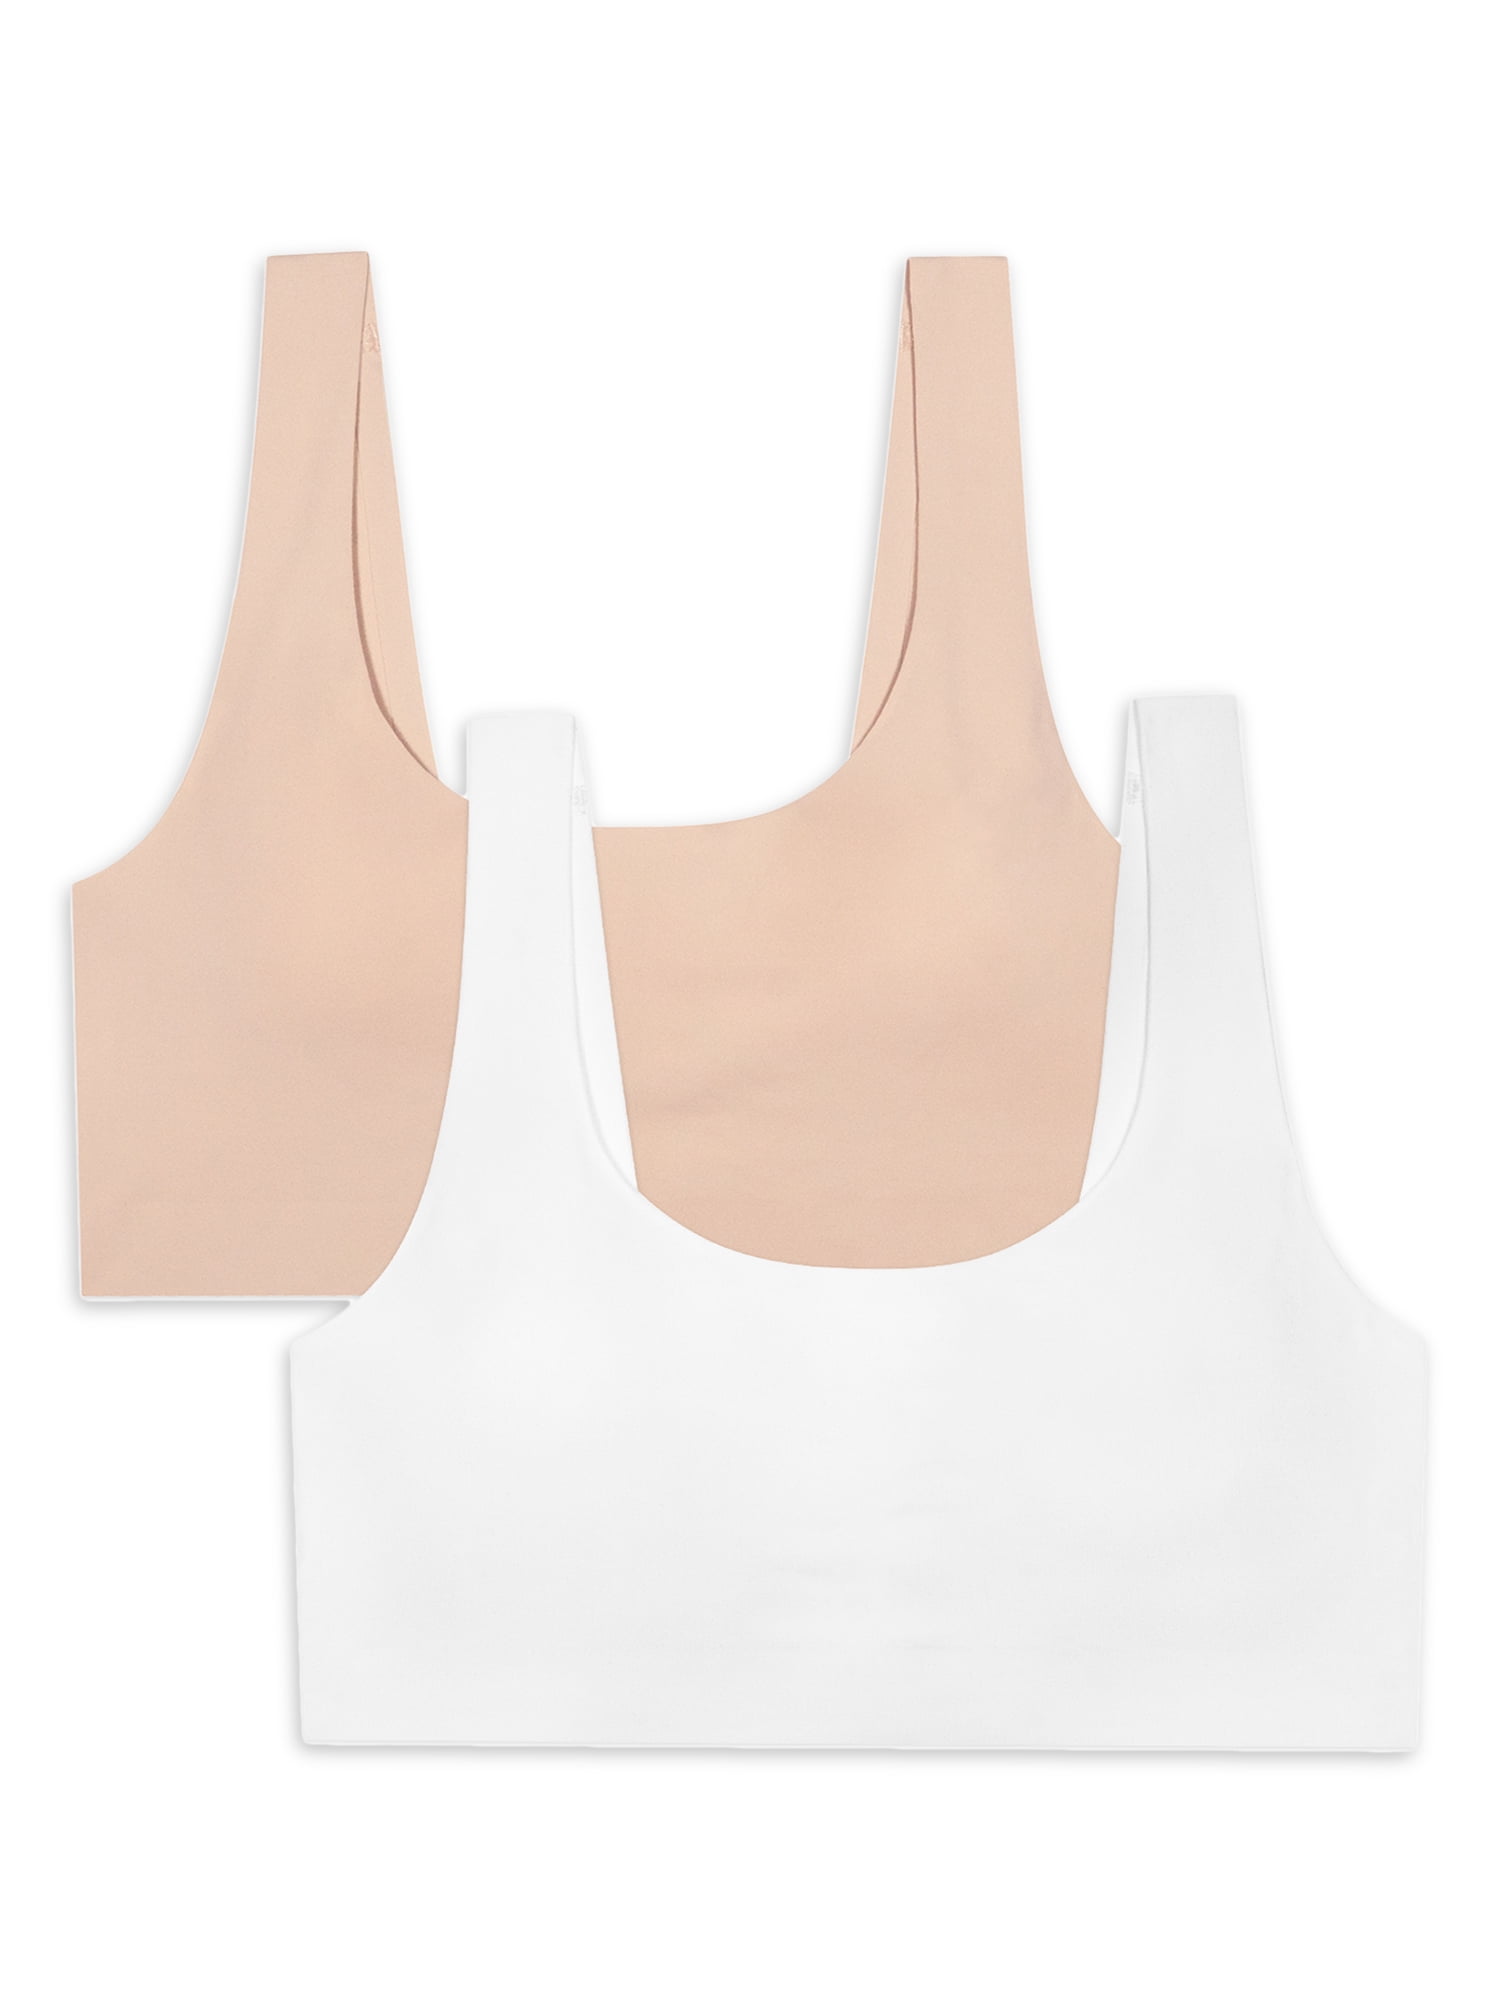 Fruit of the Loom Girls Bras, 2 Pack Invisible Scoop India